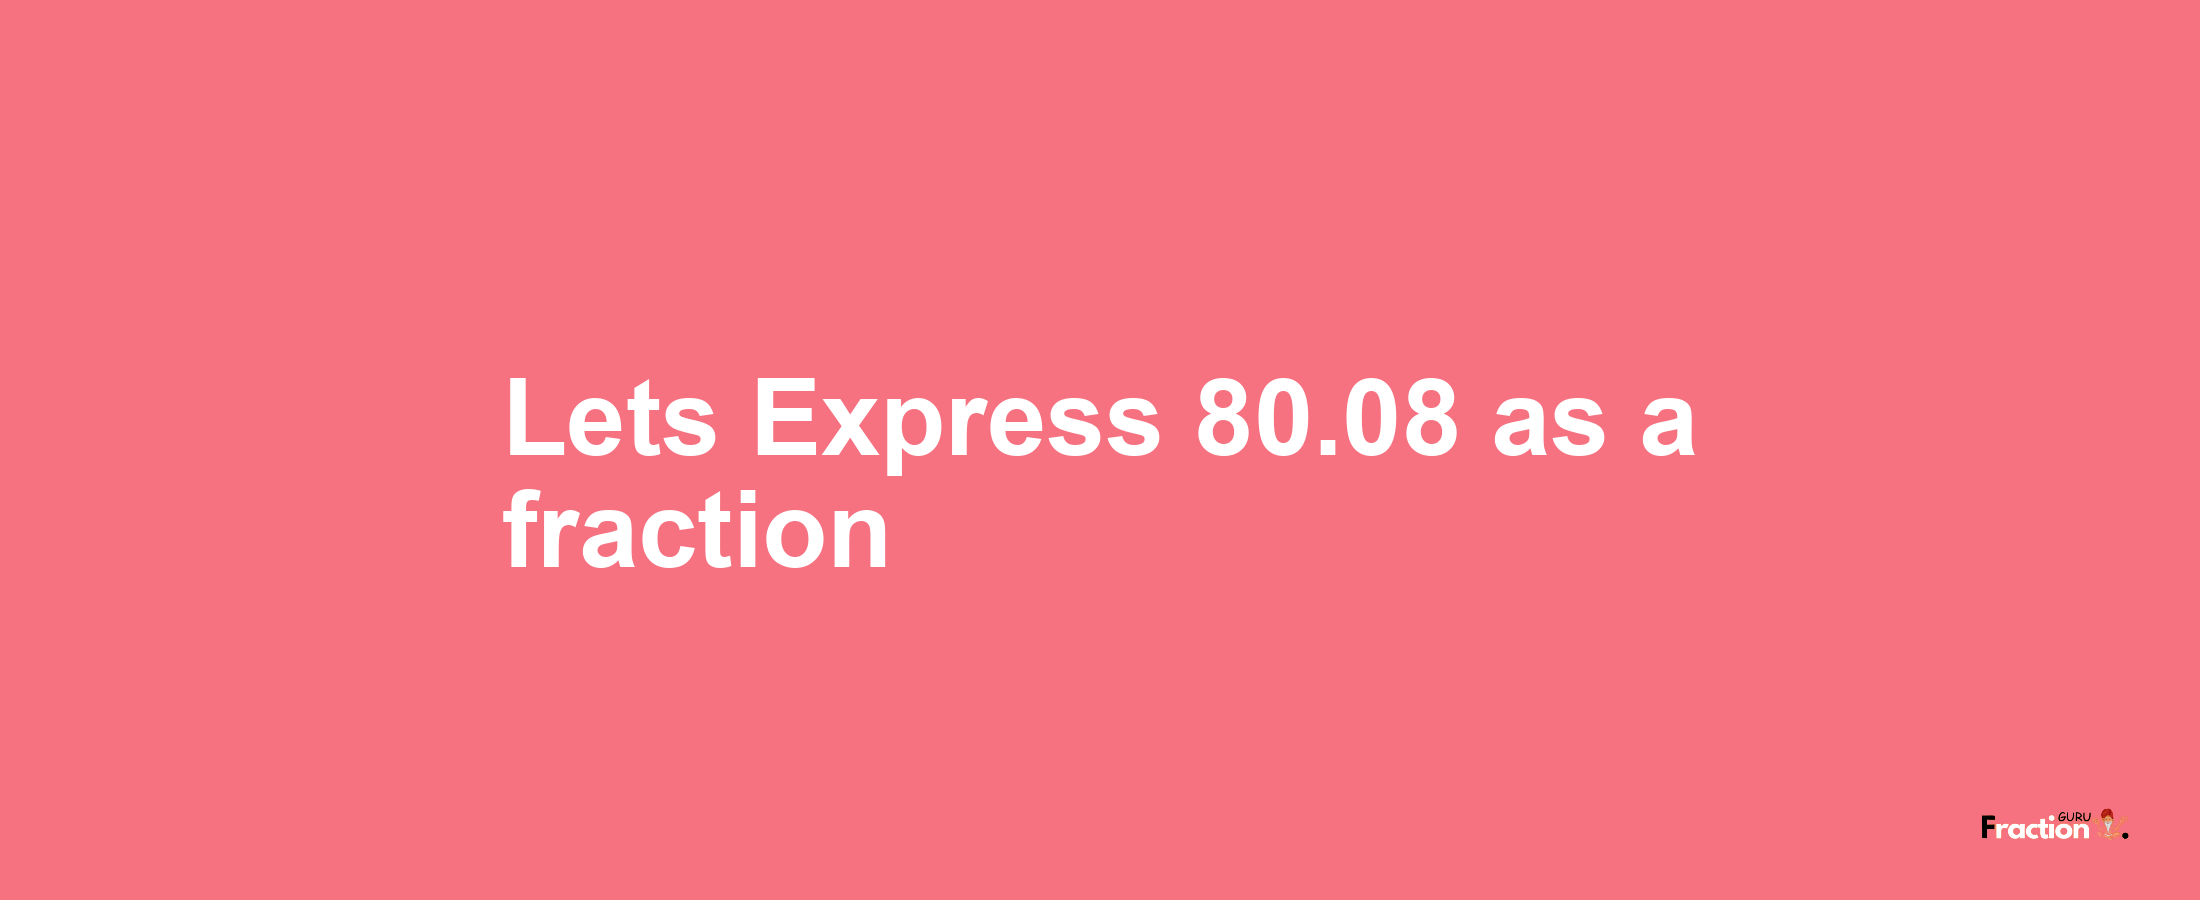 Lets Express 80.08 as afraction